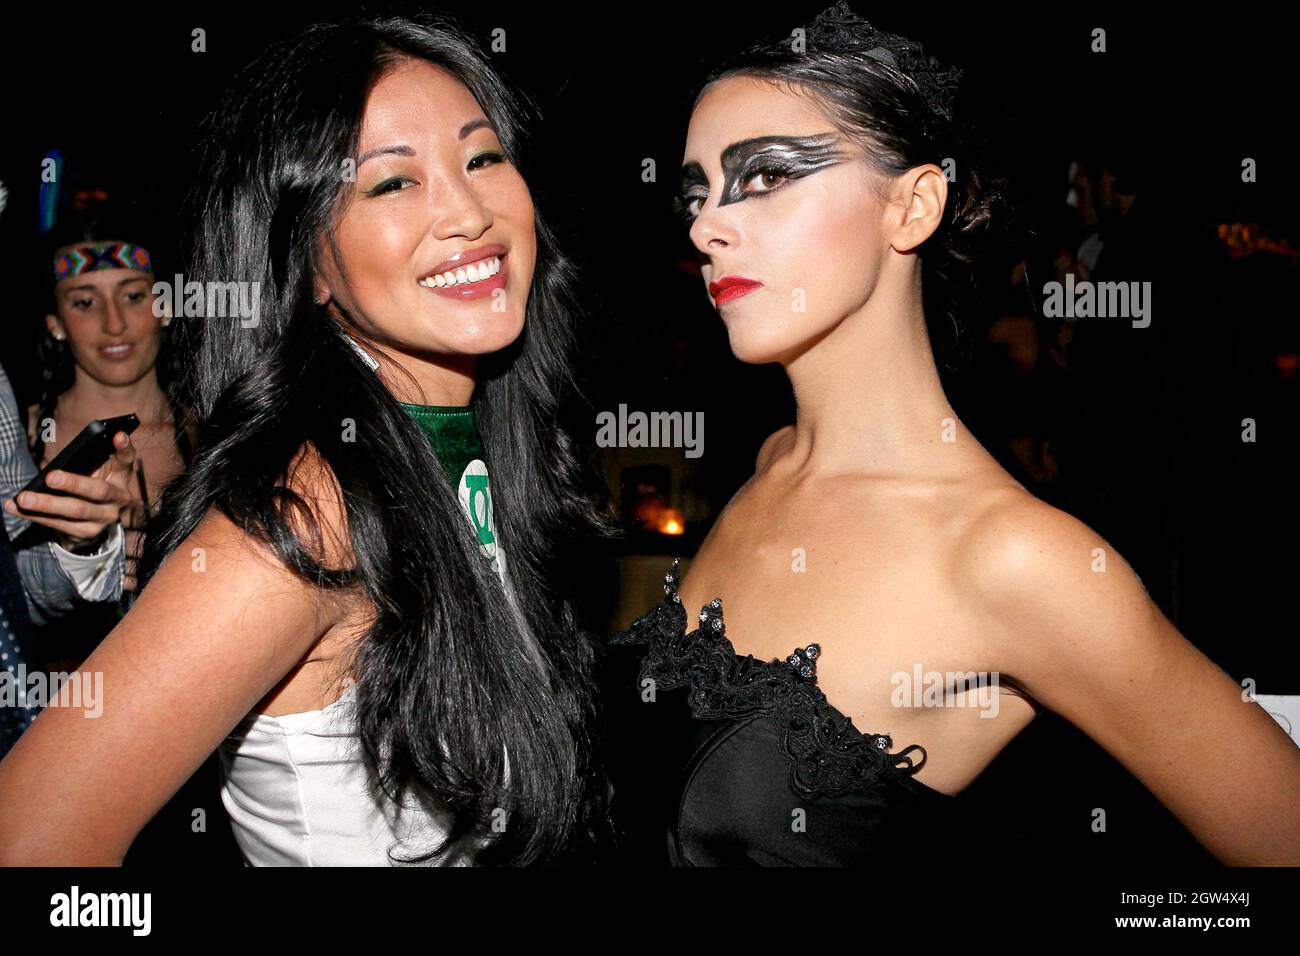 New York, NY, USA. 29 October, 2011. Stacey Kimball, Eliza Orlins at the 2011 Halloween Costume Party hosted by Ethan Zohn And Jenna Morasca at Bathtub Gin. Credit: Steve Mack/Alamy Stock Photo